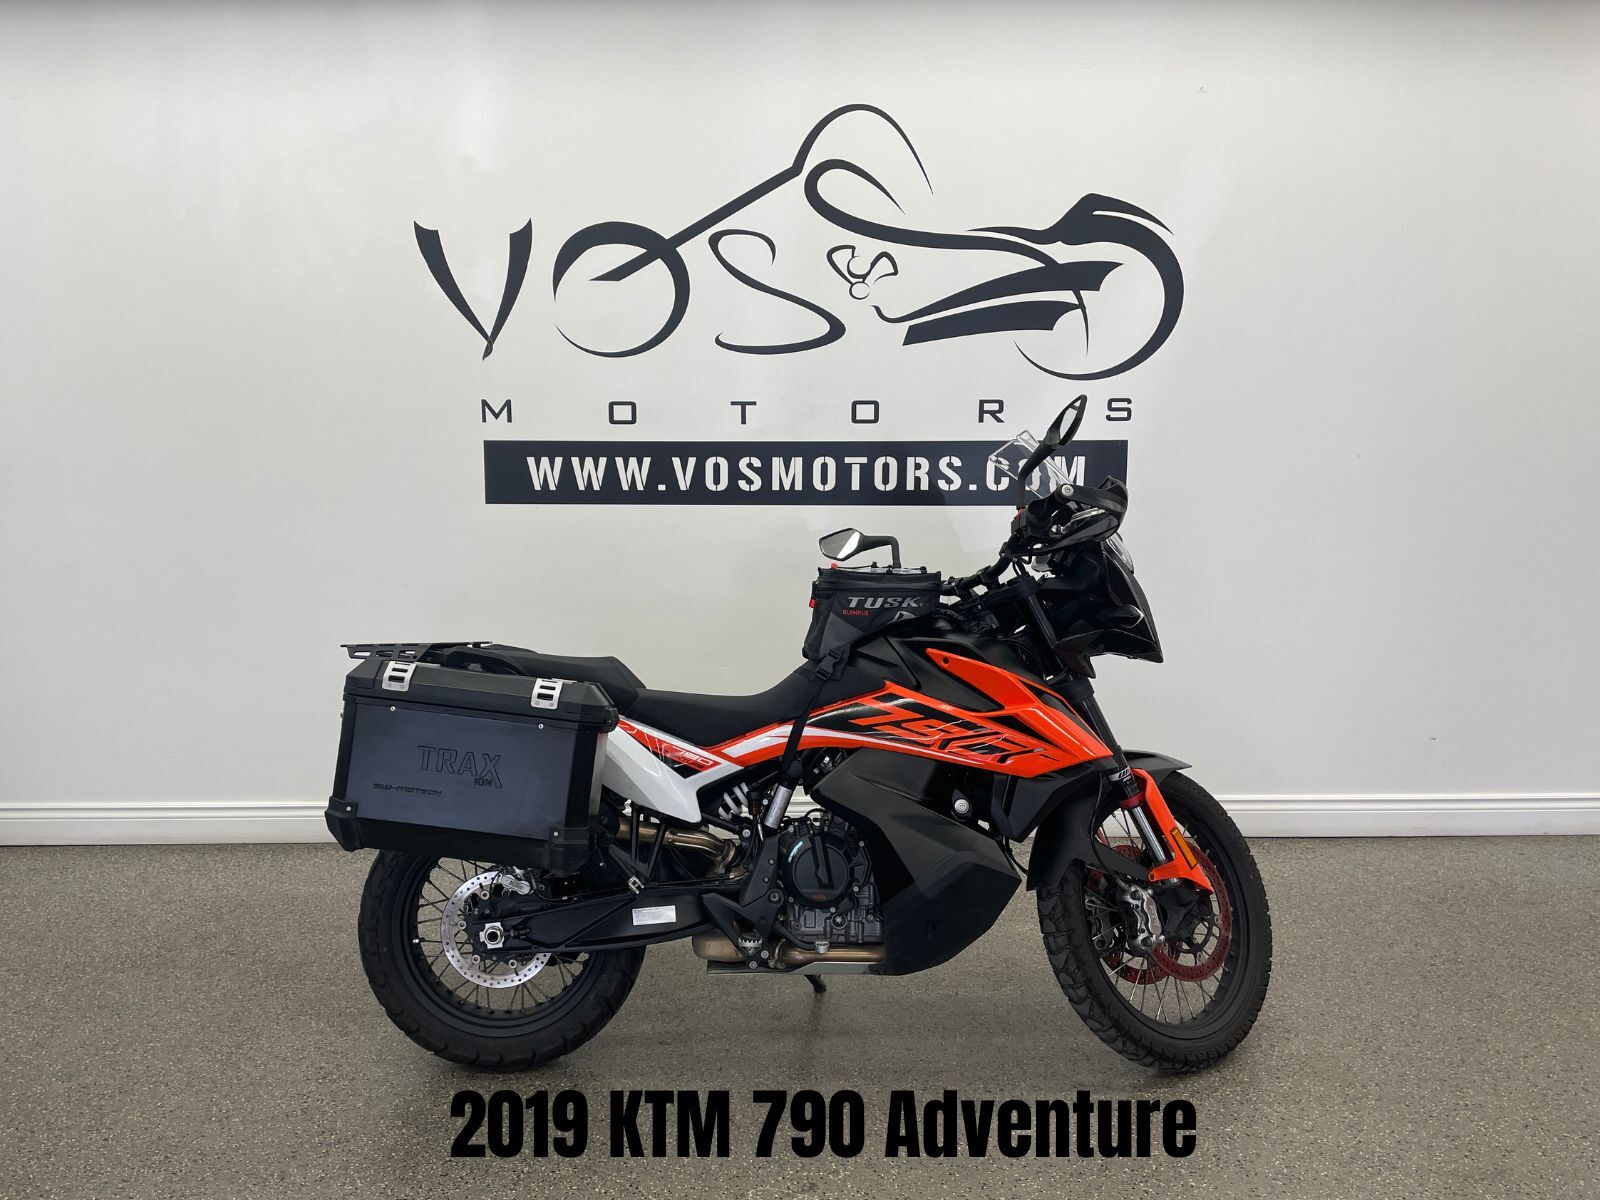 2019 KTM Adventure 790 ABS - V5190 - -No Payments for 1 Year**